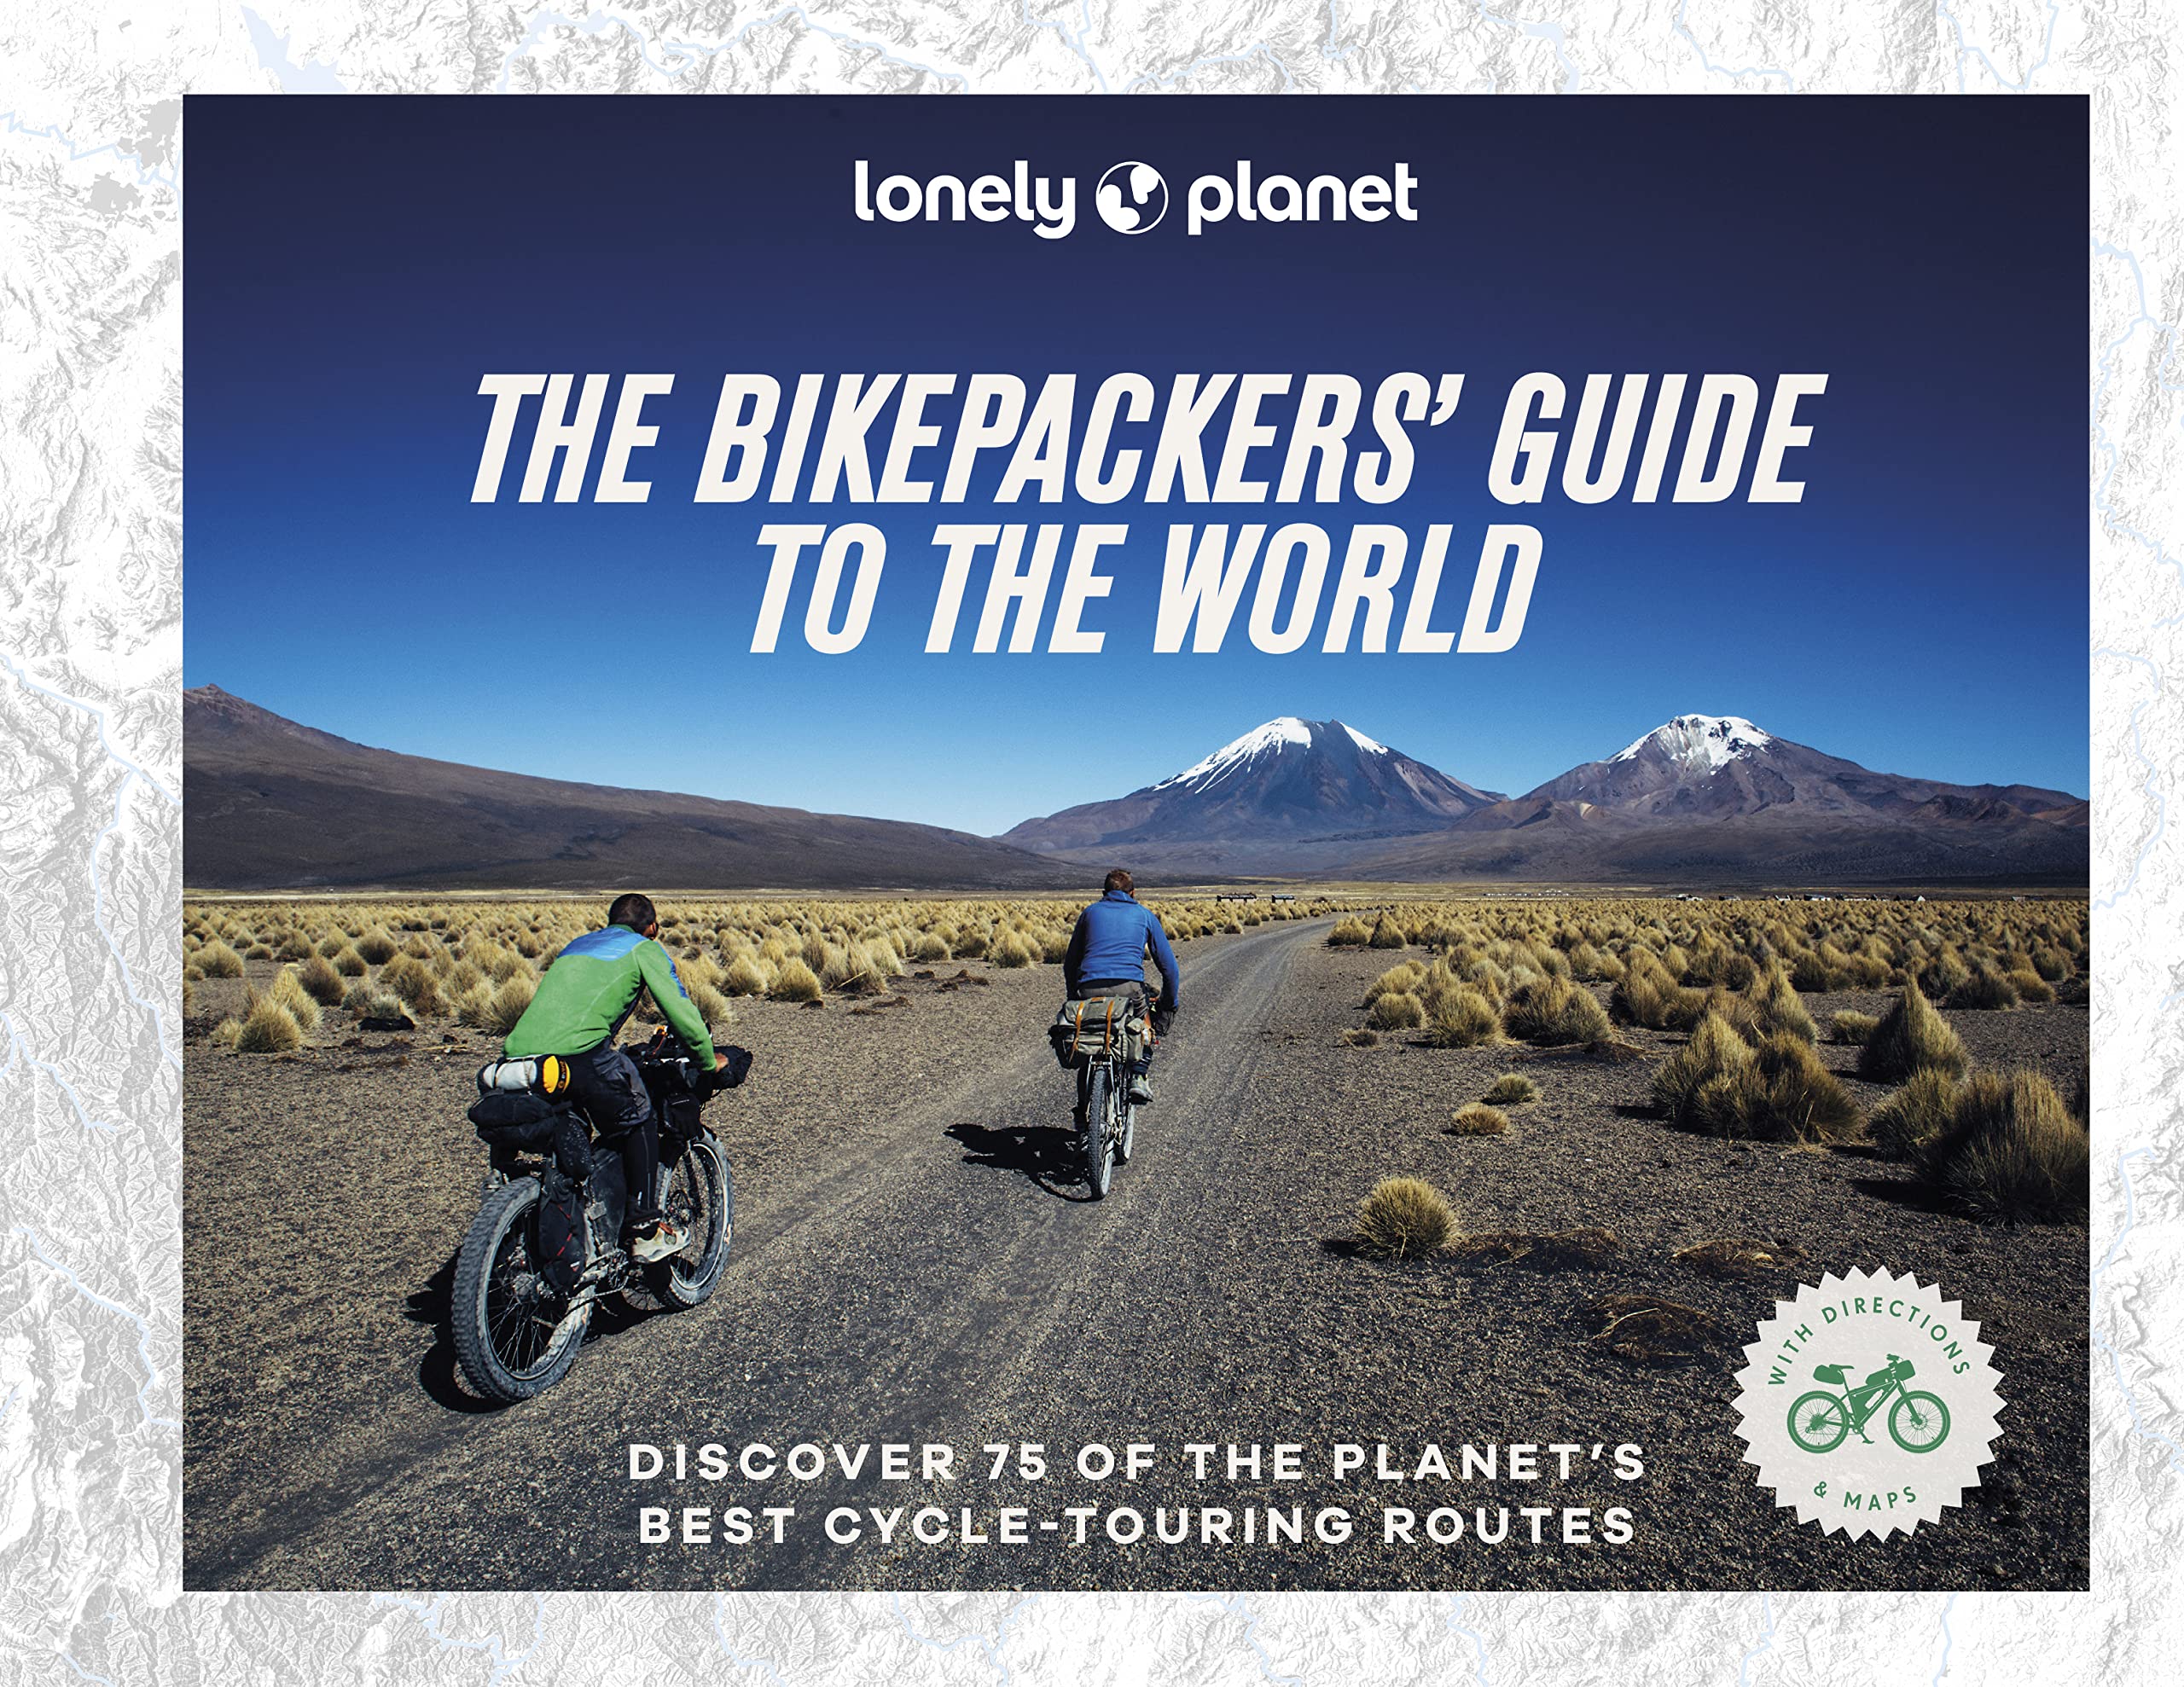 Bikepackers' Guide to the World